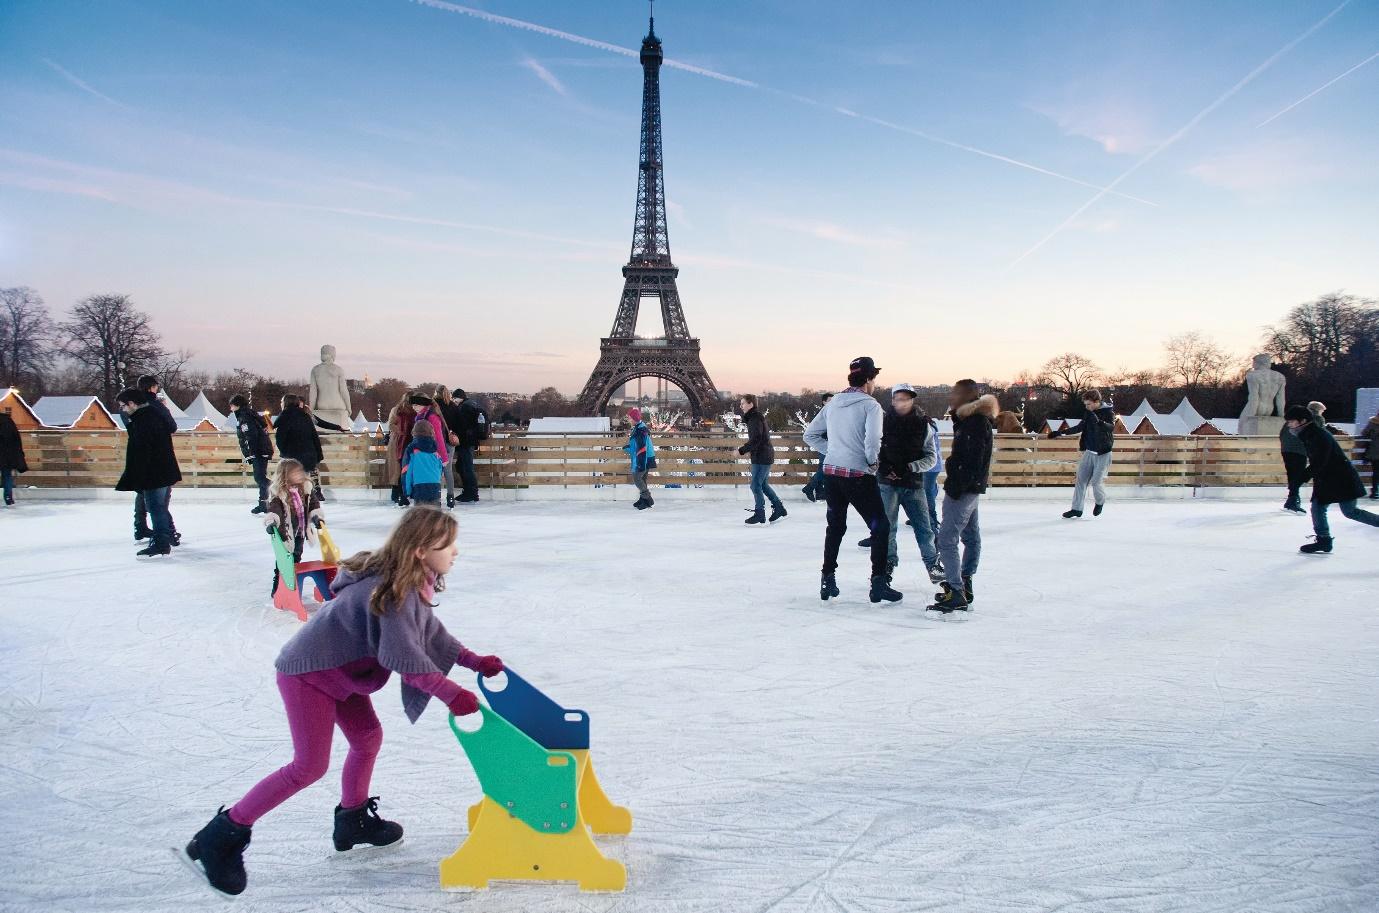 Kids along with adults skating in Trocadéro Gardens with a magnificent view of the Eiffel Tower | Wedifys